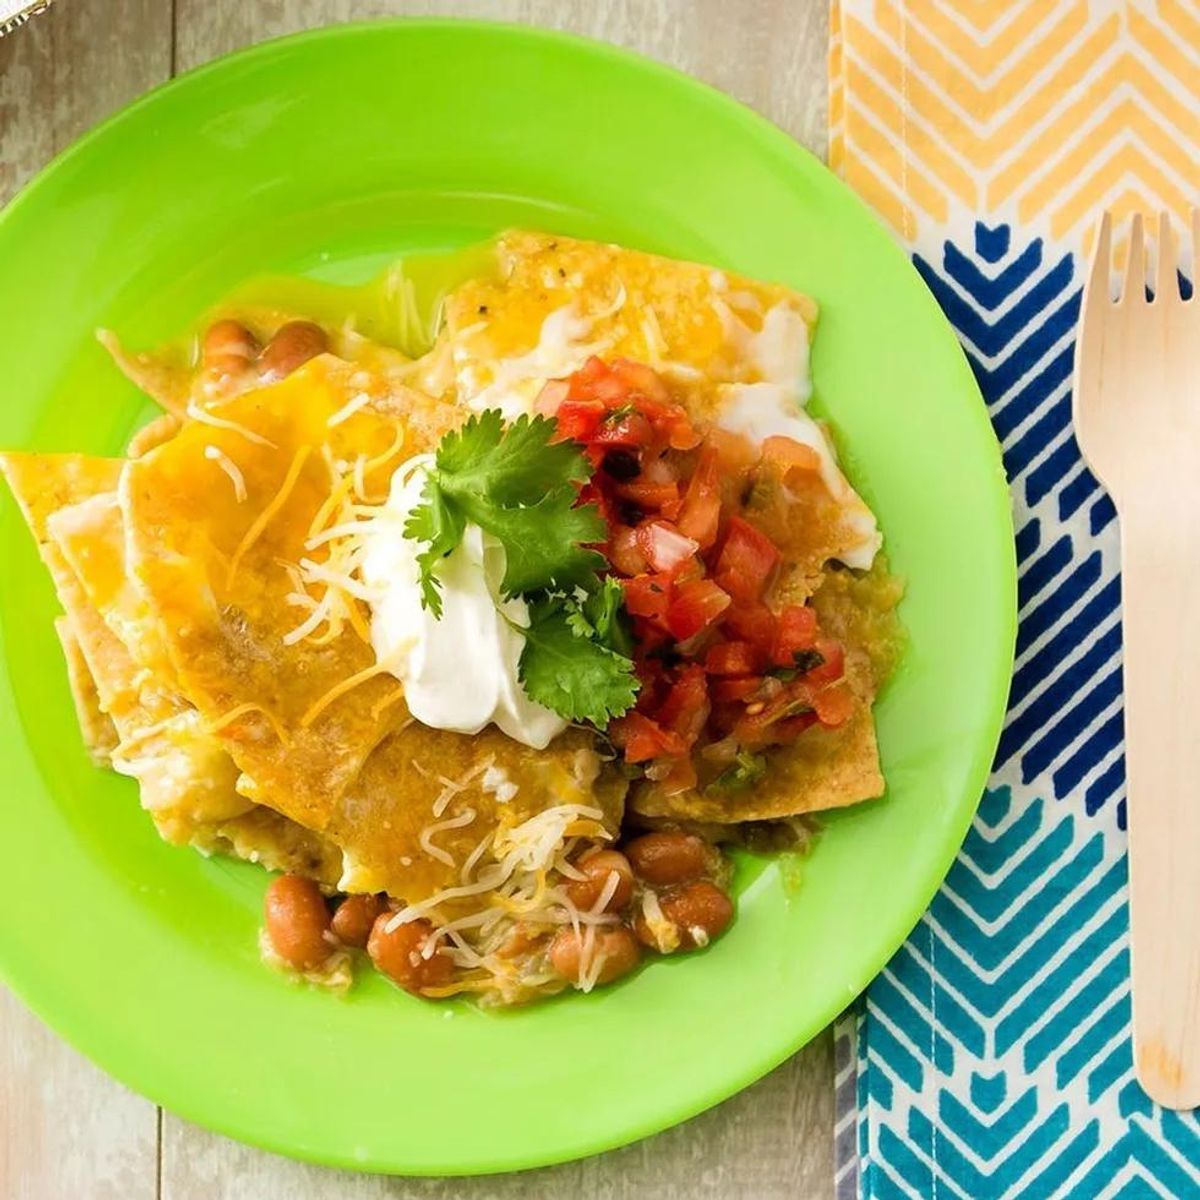 Camping Foods and recipes nachos on a green plate